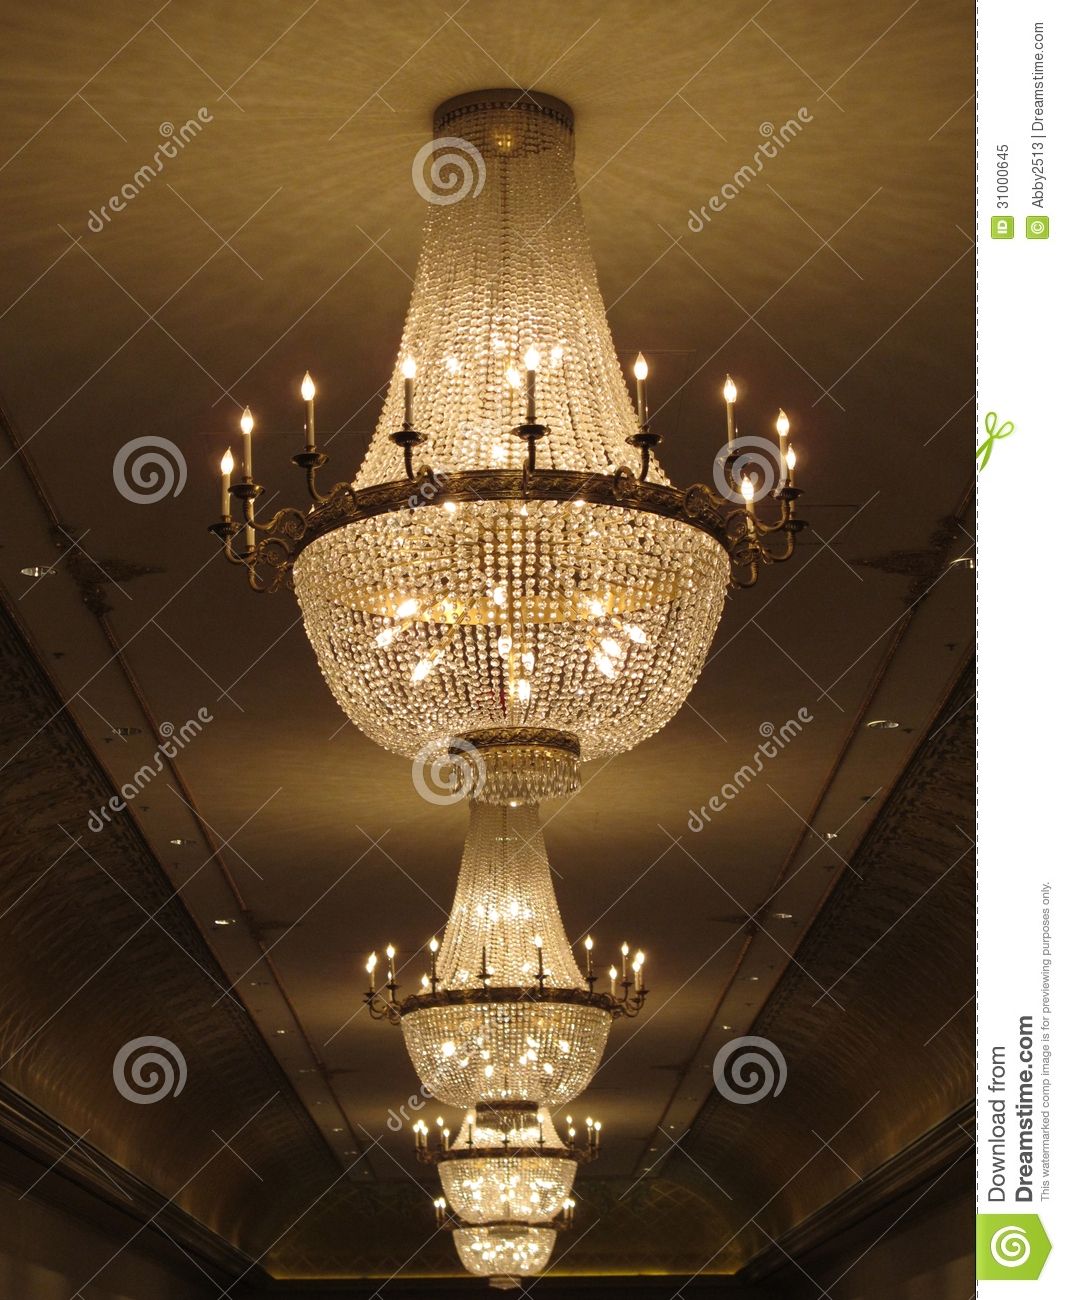 Gorgeous Crystal Chandelier Royalty Free Stock Photo Image 31000645 With Regard To Ballroom Chandeliers (Photo 16 of 264)